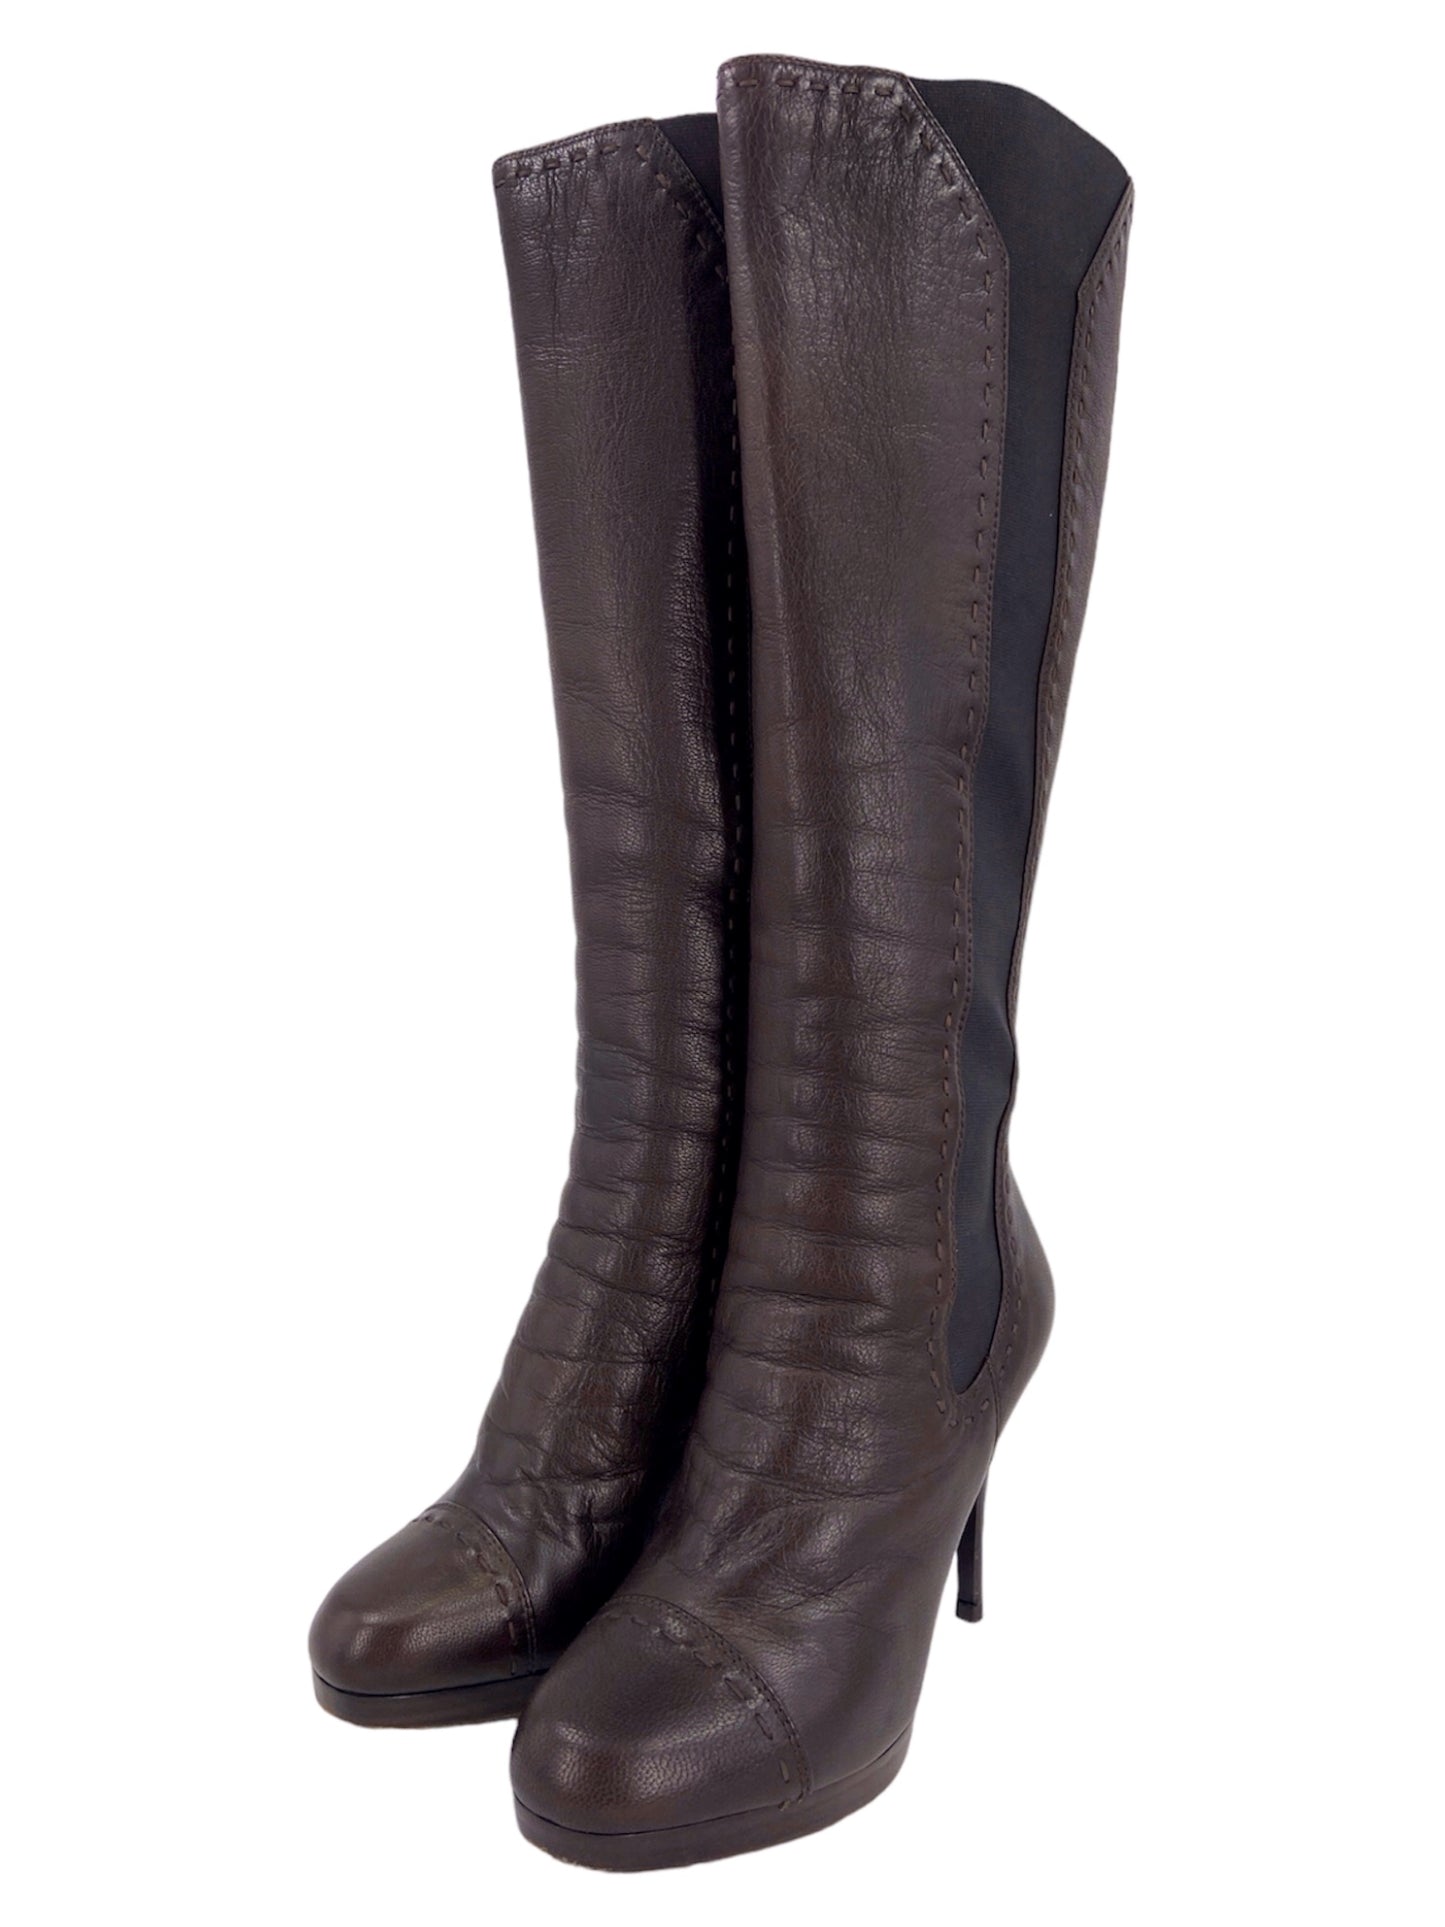 Yves Saint Laurent Rive Gauche Tom Ford Shearling Brown Heeled Stiletto Long Boots 37.5